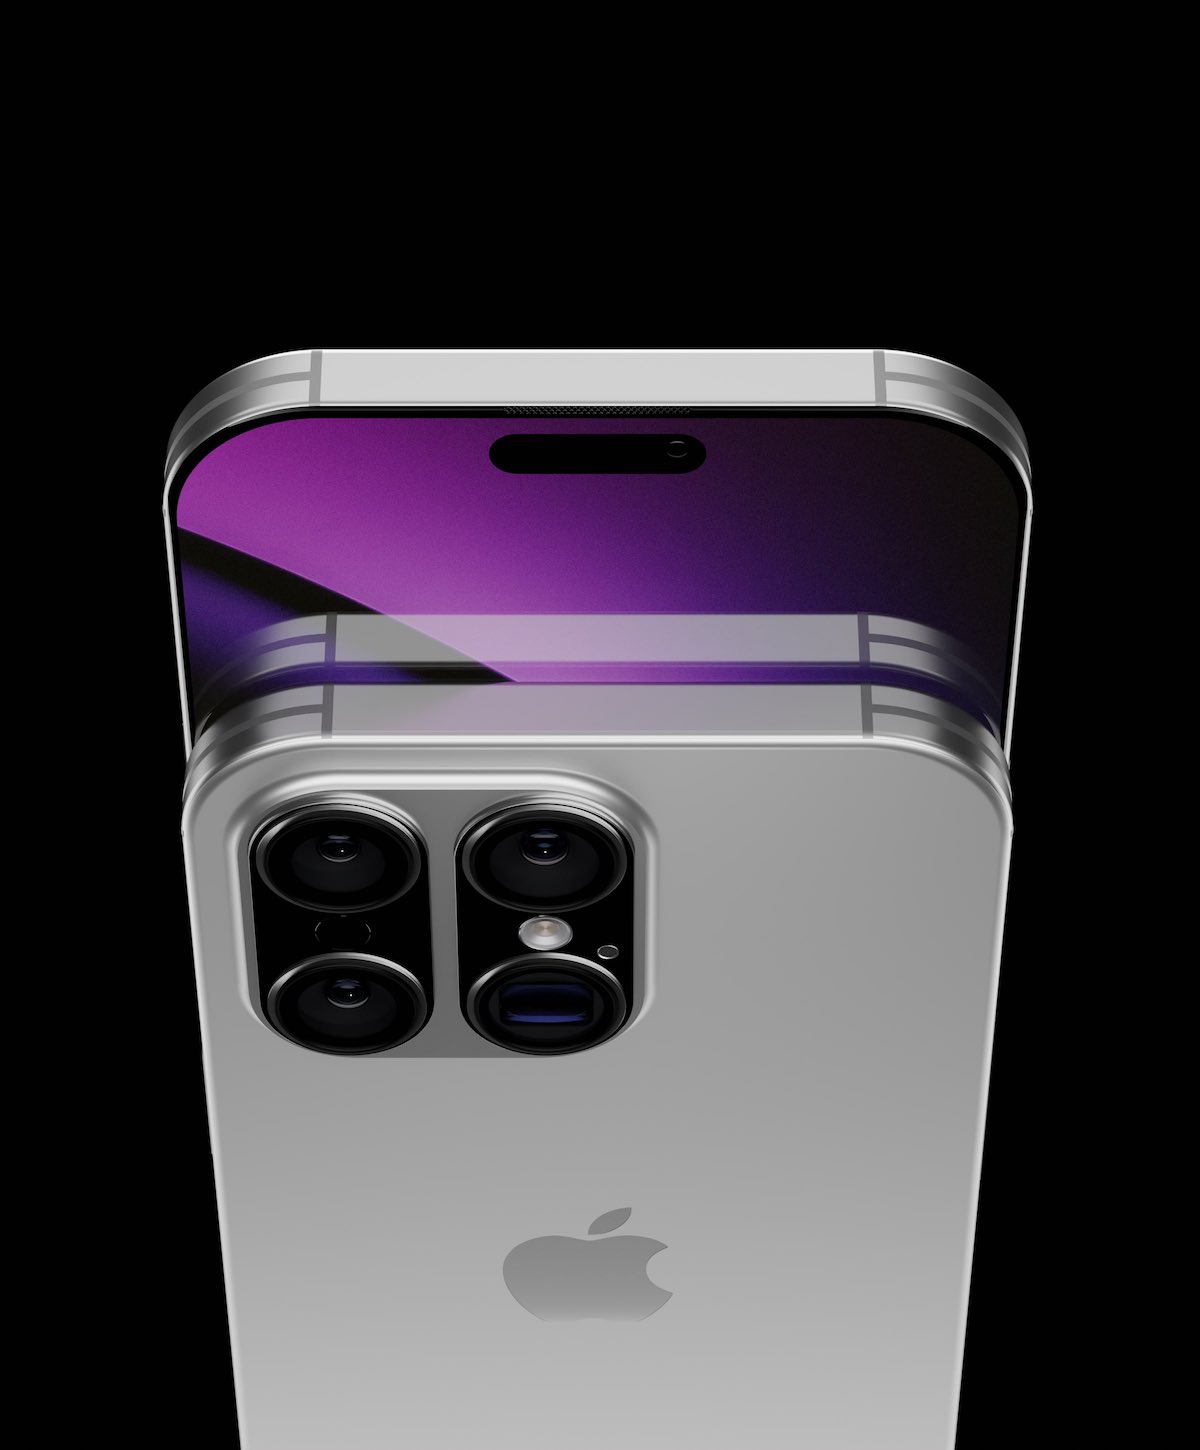 iPhone 16 Pro Max and iPhone 16 Pro to Feature Tetra Prism Lens for